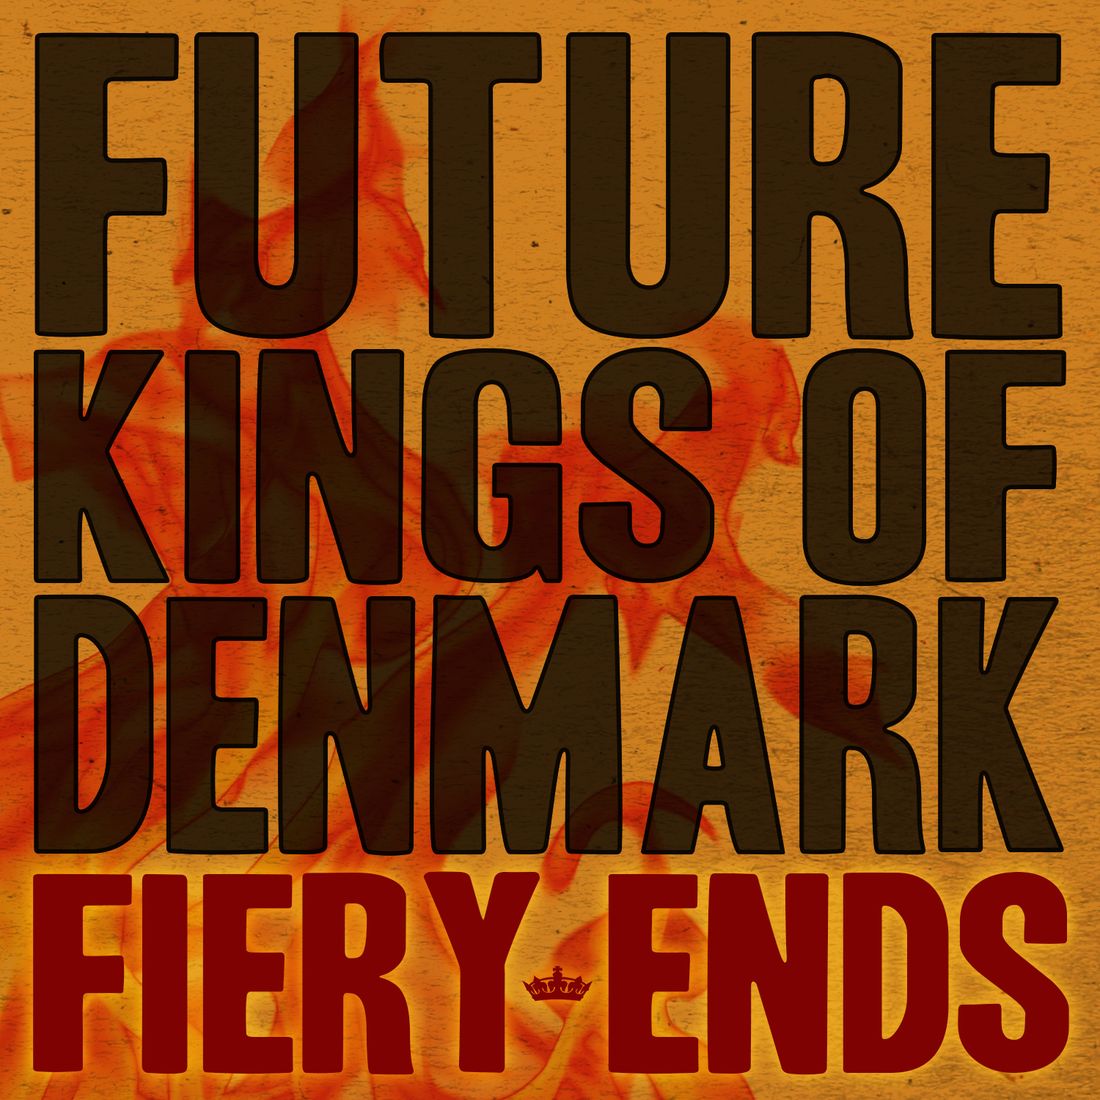 Fiery Ends album @ Future Kings Of Denmark. Tracks:  It's a New Day in Your World, Can't Remember When We Last Kissed, Stay With Me, Starting Over, No More Being Nice, Better Off Blue
